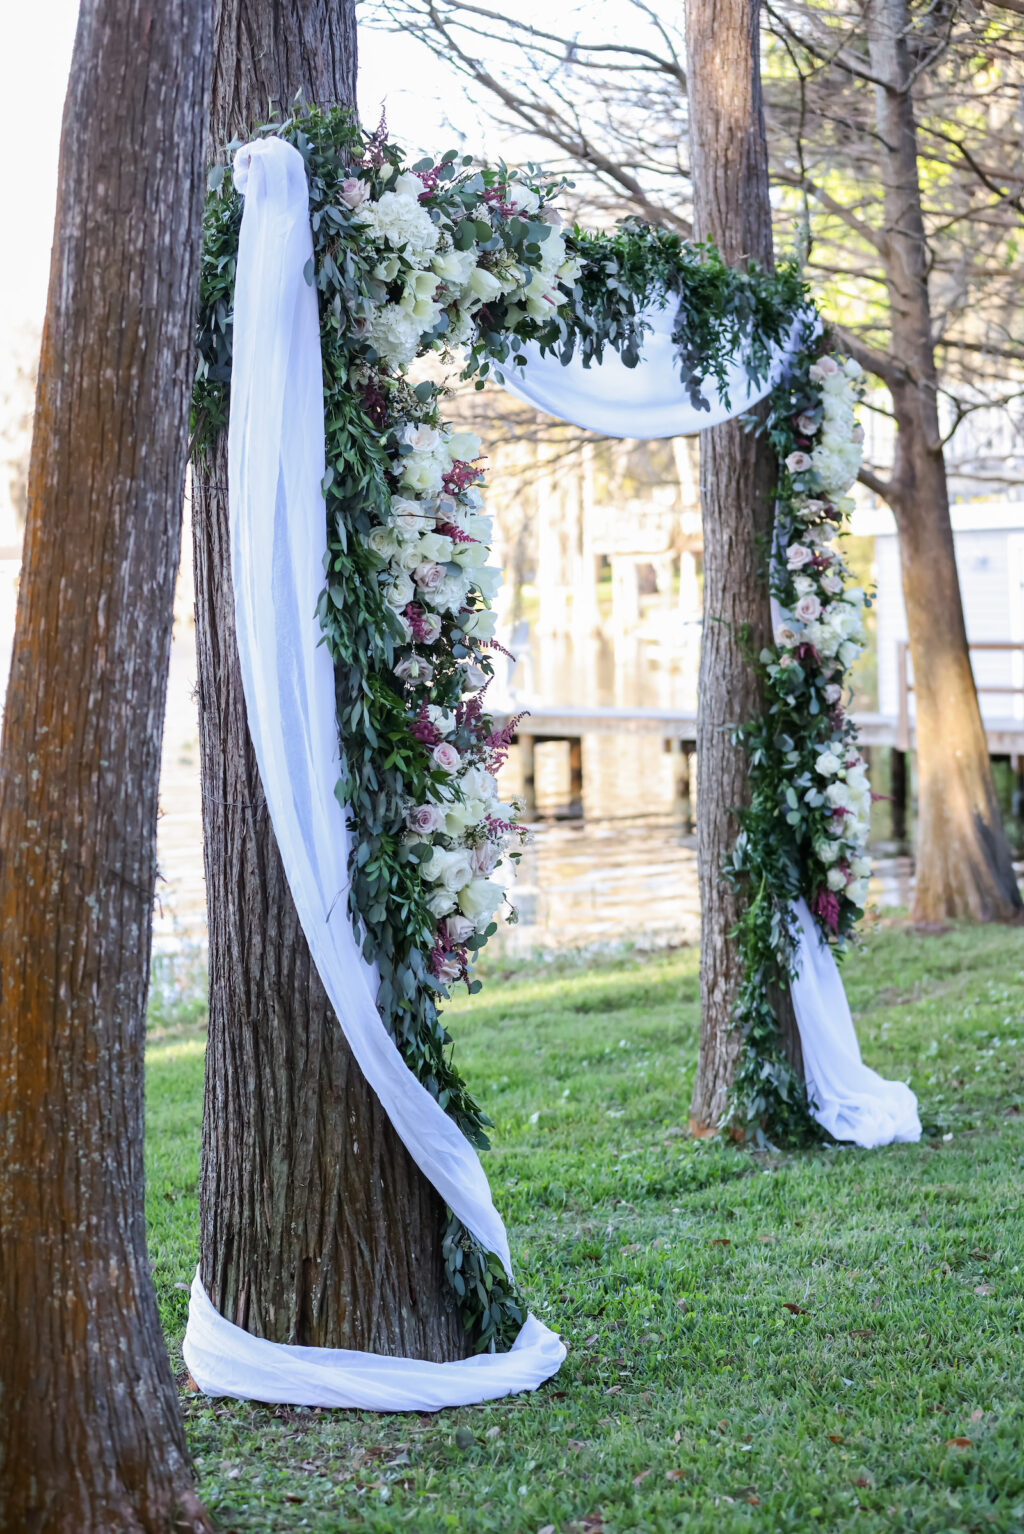 Romantic Outdoor Wedding Ceremony Decor, Wooden Rectangular Arch Attached to Tree with White Linen Draping, Greenery and White Floral Arrangement | Tampa Bay Wedding Photographer Lifelong Photography Studio | Wedding Planner Special Moments Event Planning